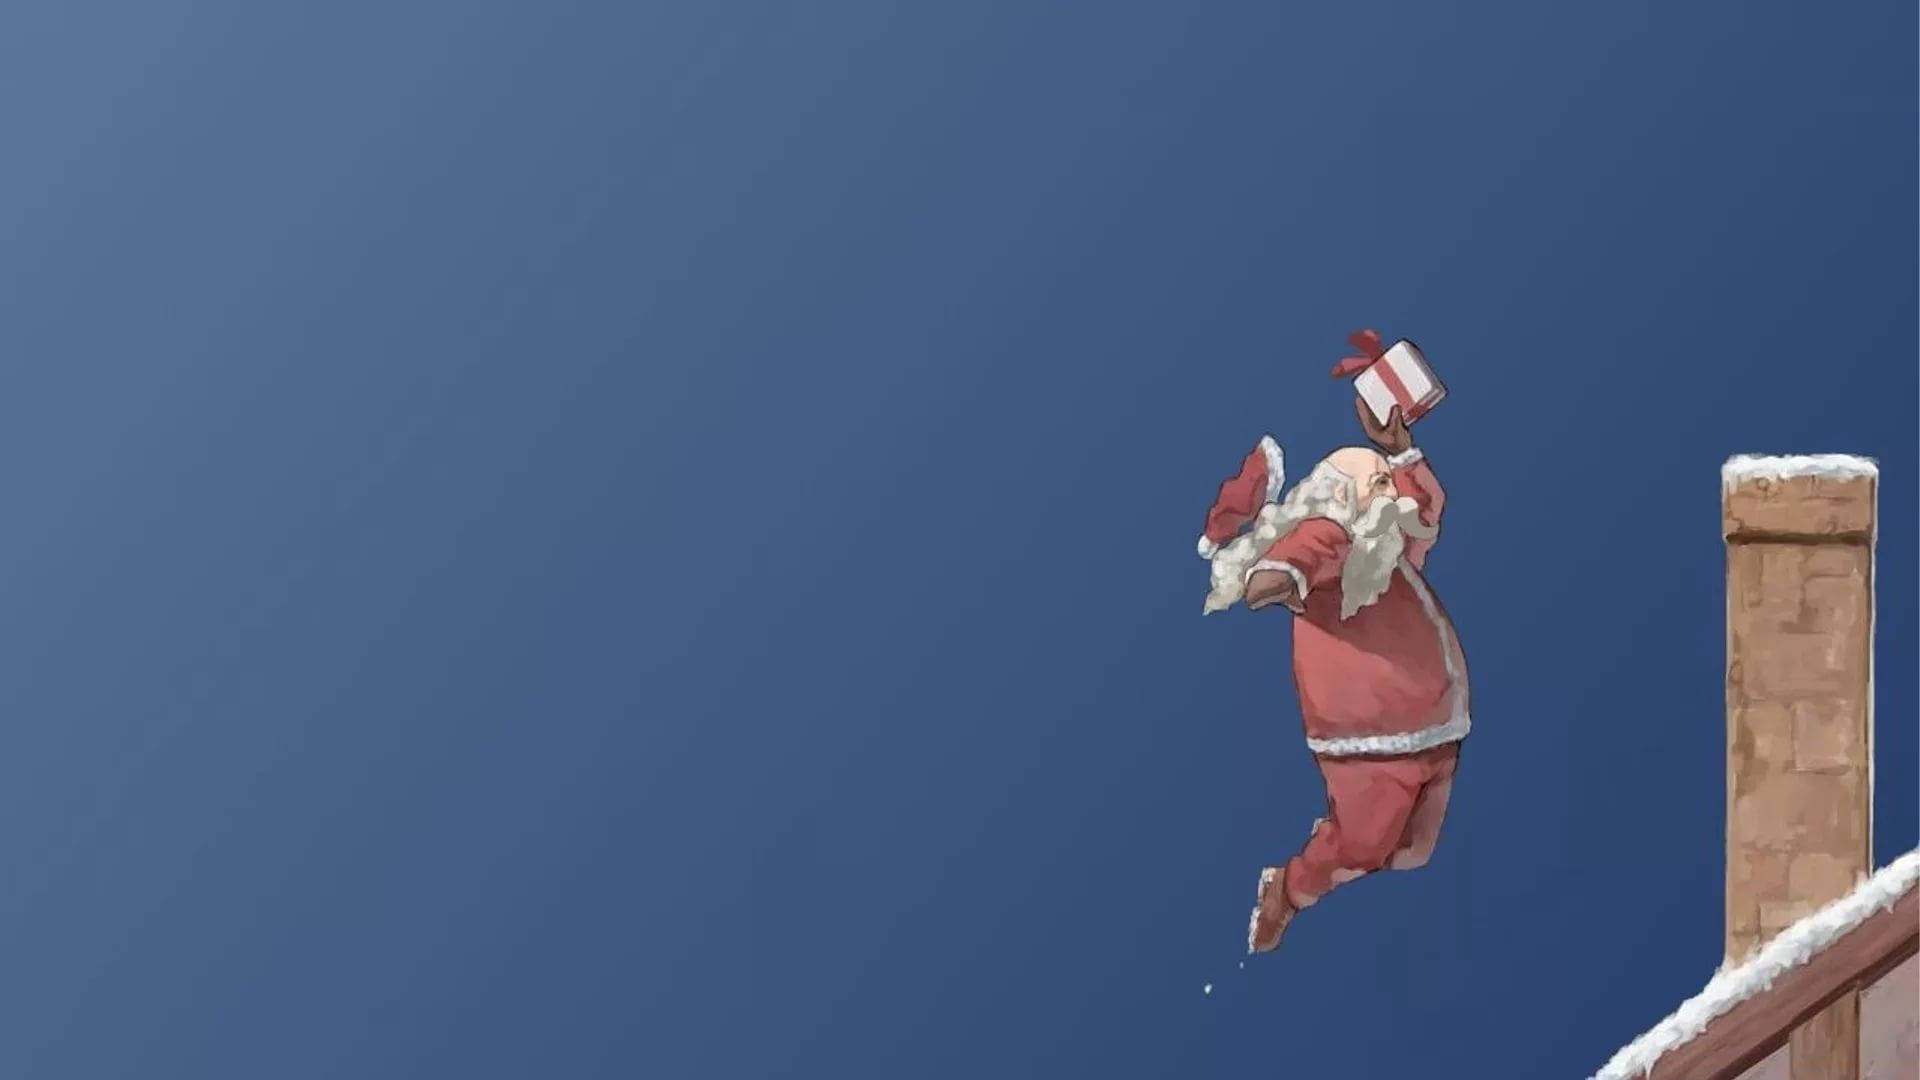 Santa Floating In Air Funny Christmas Background